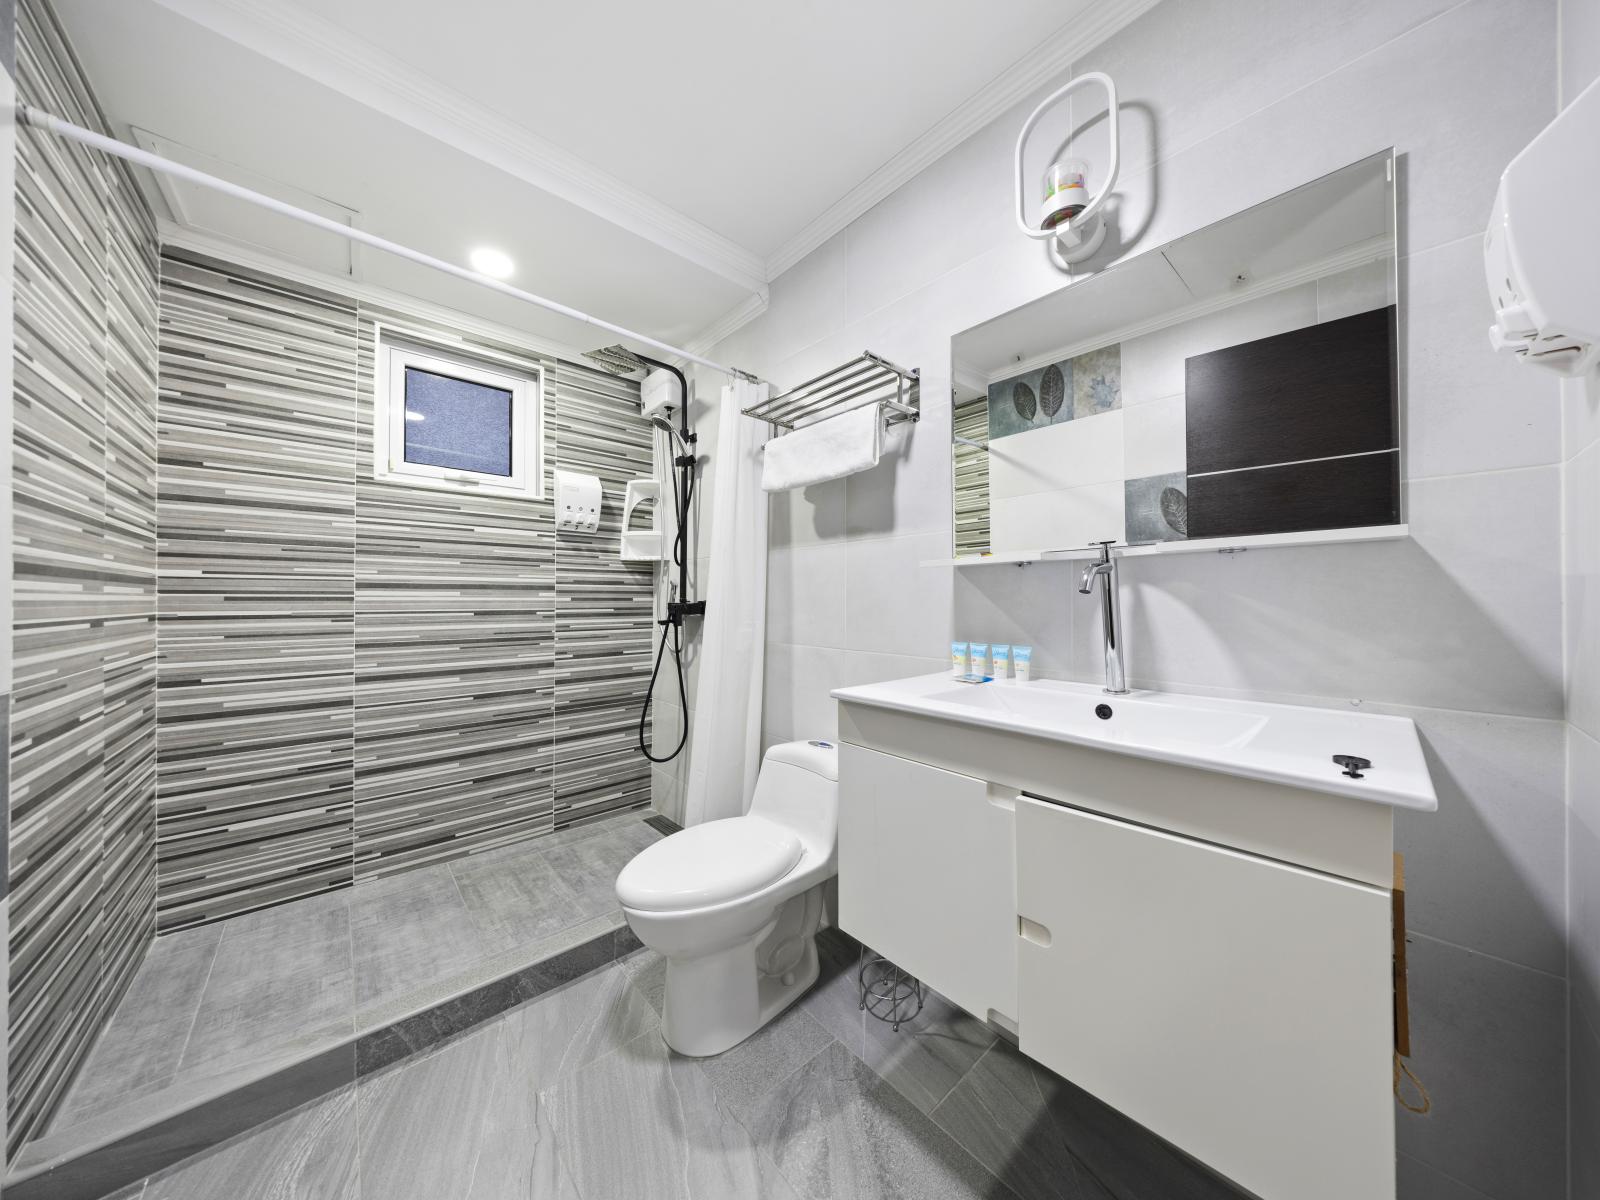 Indulge in comfort in the bathroom of the home in Aruba - Spacious walk-in shower area, where every detail is designed for your enjoyment - Entertain dreams of spa-like serenity in the bathroom, a tranquil escape from the world